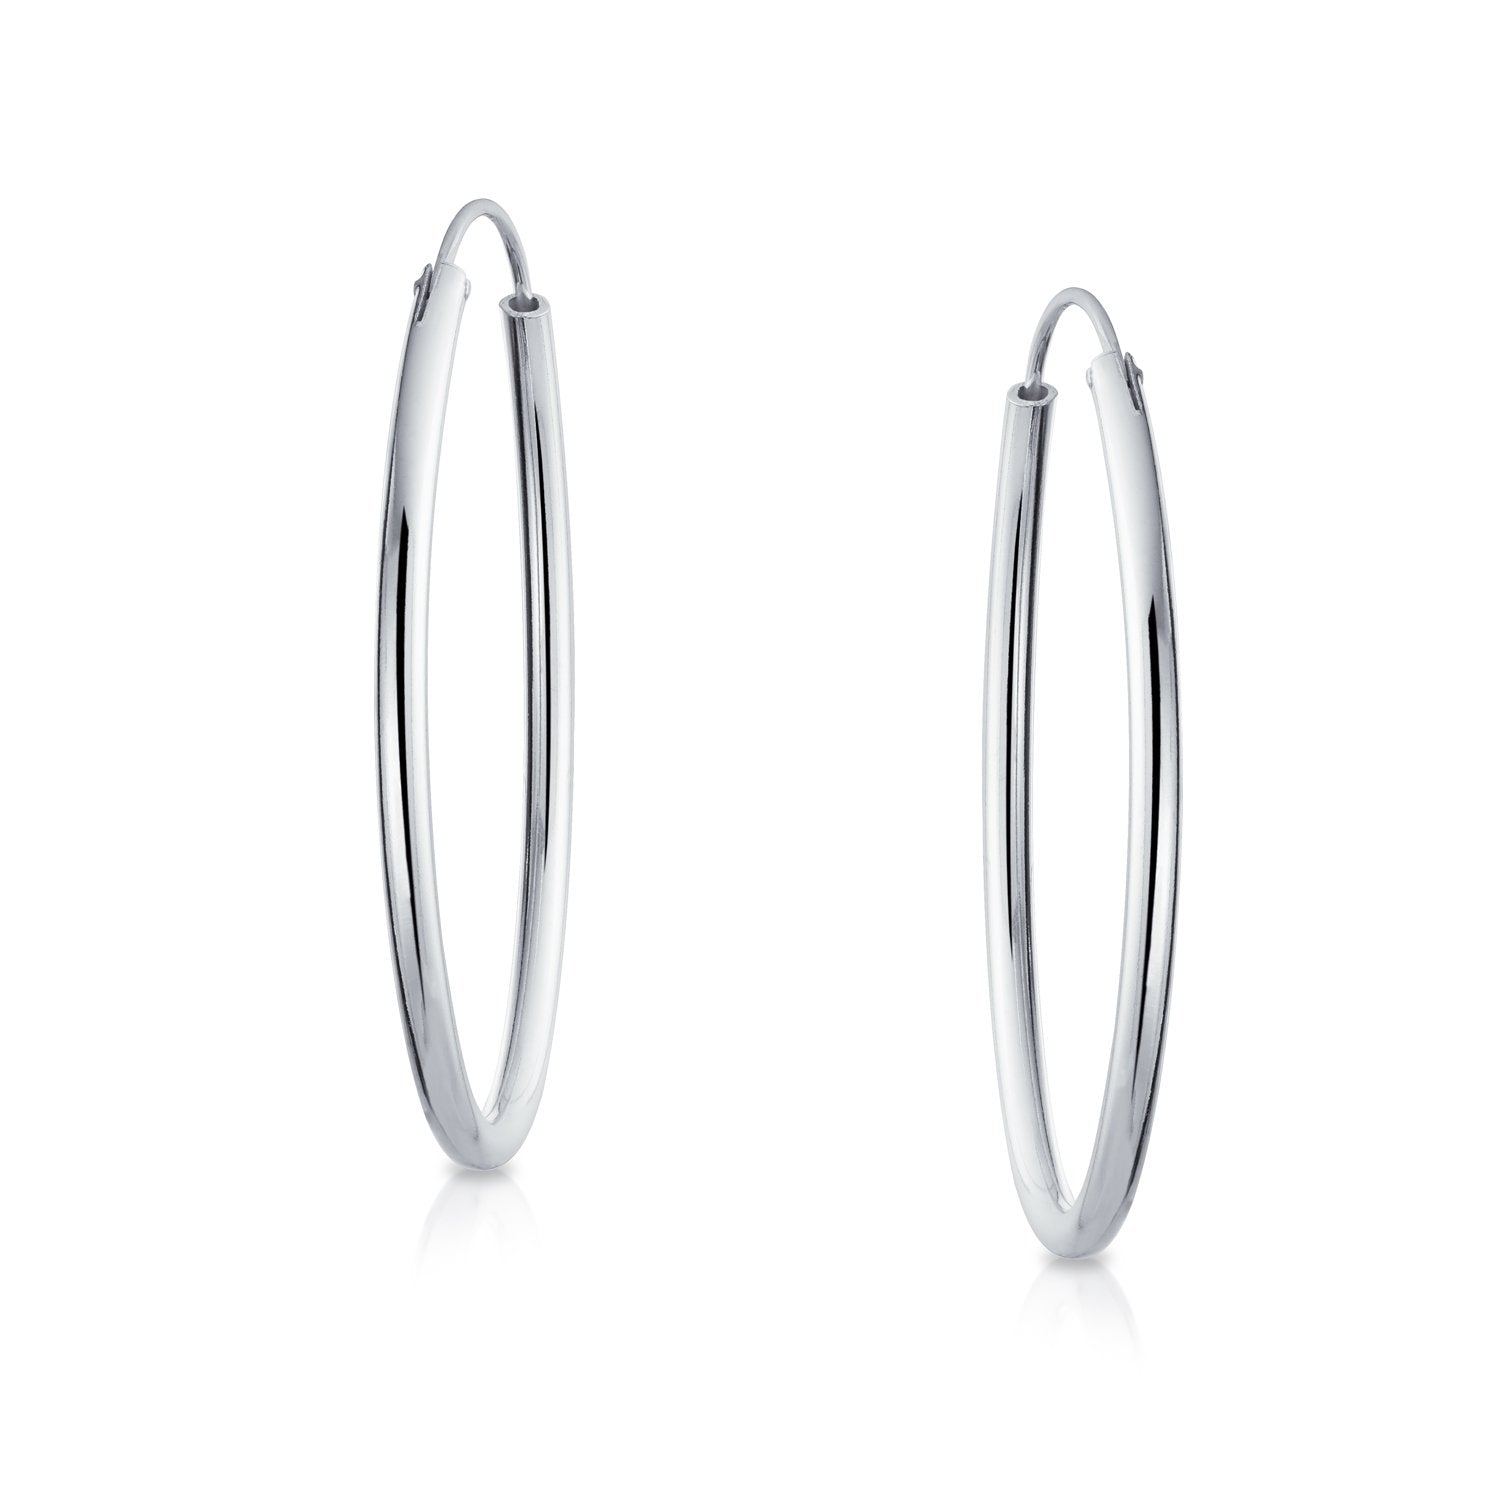 Minimalist Round Endless Continuous Tube Hoop Earrings Sterling Silver - Joyeria Lady